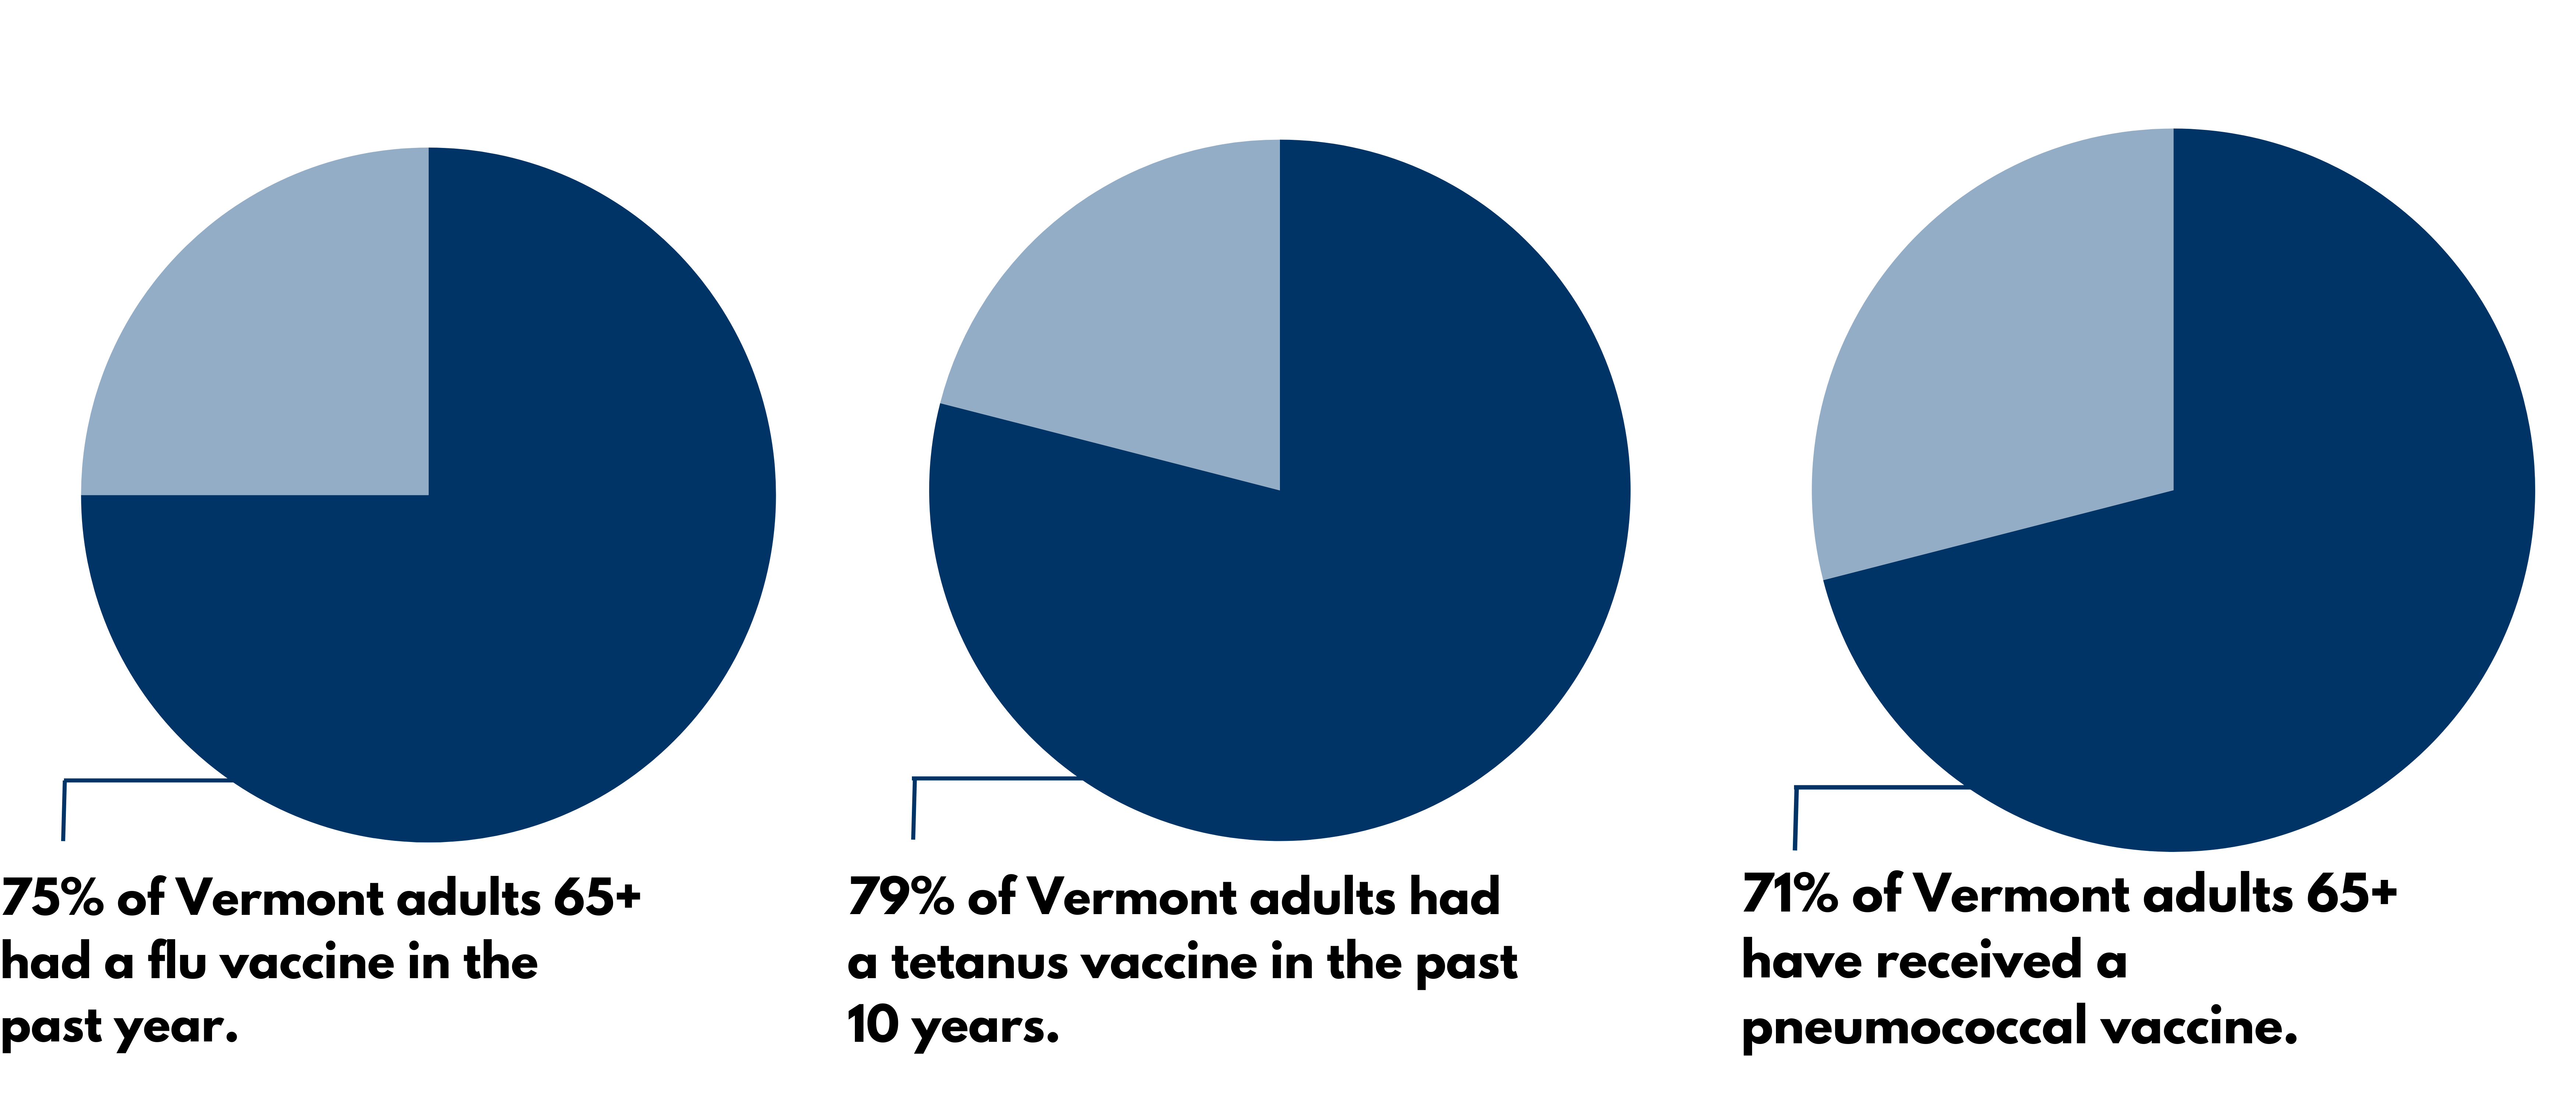 Three pie charts showing vaccine rates of Vermonters: 1. 75% of Vermont adults 65+ had a flu vaccine in the past year 2. 79% of Vermont adults had a tetanus vaccine in the past 10 years 3. 71% of Vermont adults 65+ have received a pneumococcal vaccine.